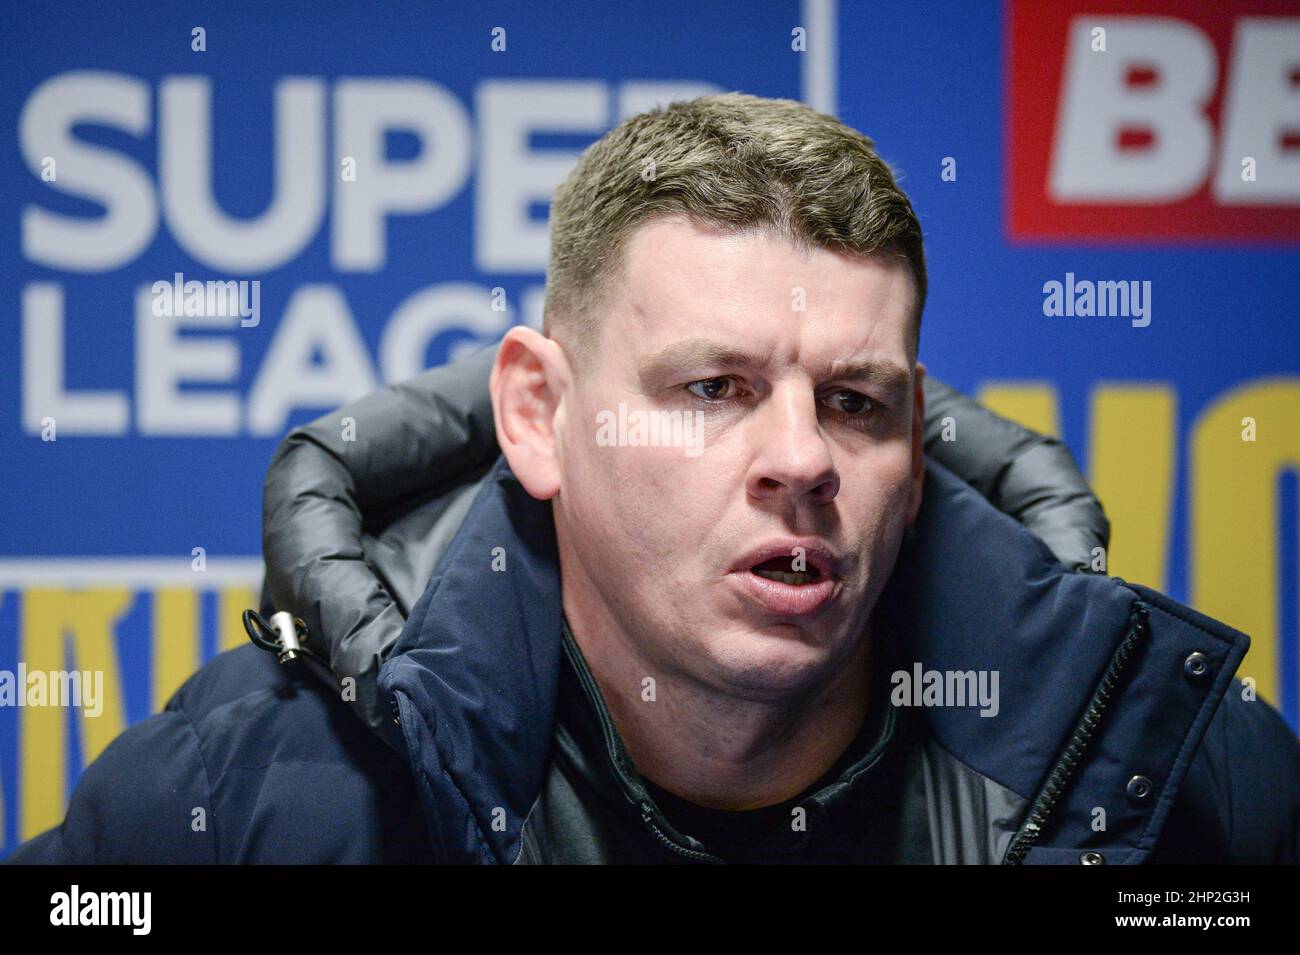 Warrington, England - 17 February 2022 - during the Rugby League Betfred Super League Round 2 Warrington Wolves vs Castleford Tigers at Halliwell Jones Stadium, Warrington, UK  Dean Williams Stock Photo